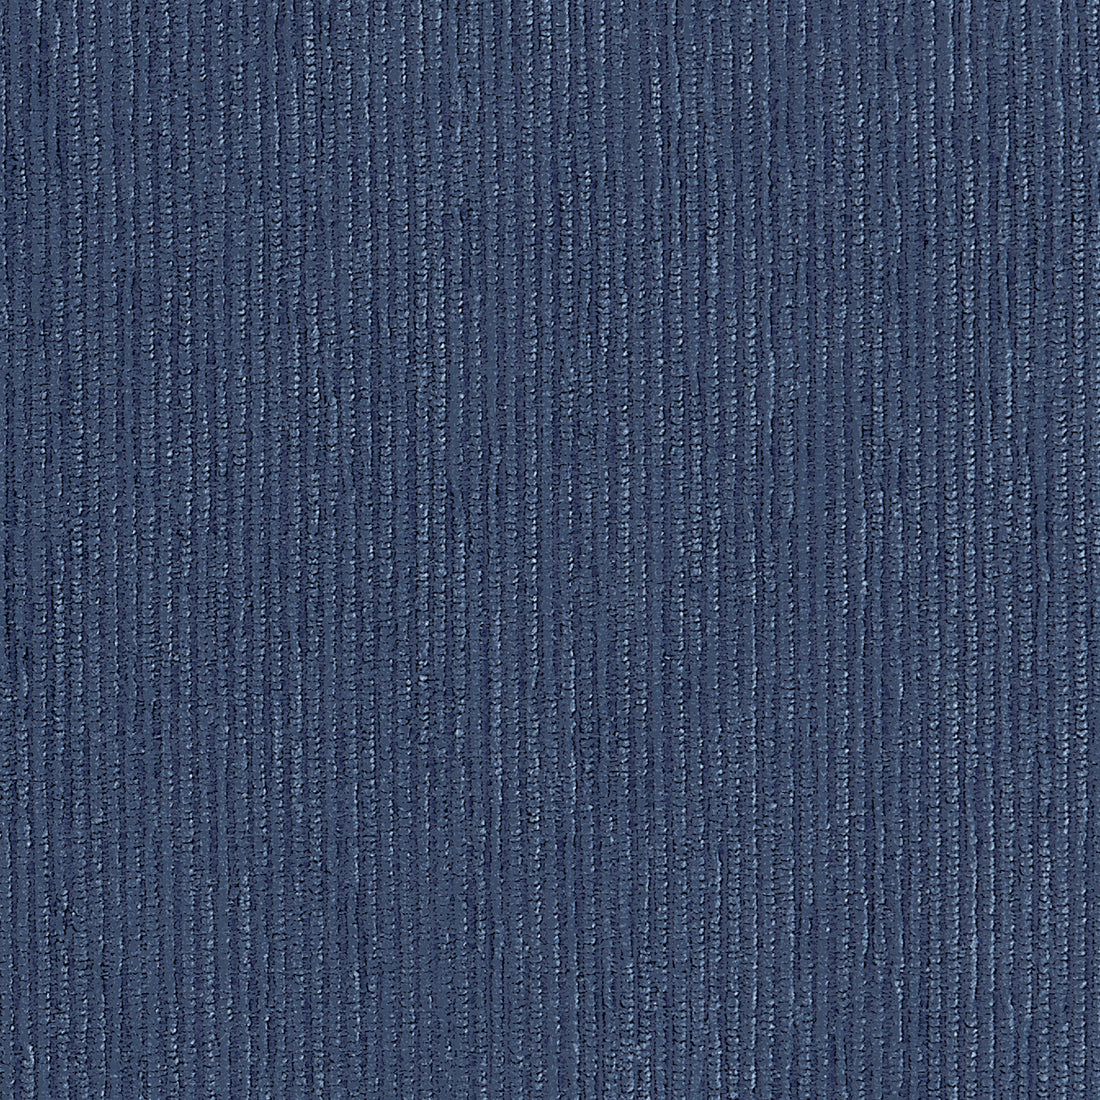 Mirage fabric in navy color - pattern number W80250 - by Thibaut in the Kaleidoscope Fabrics collection